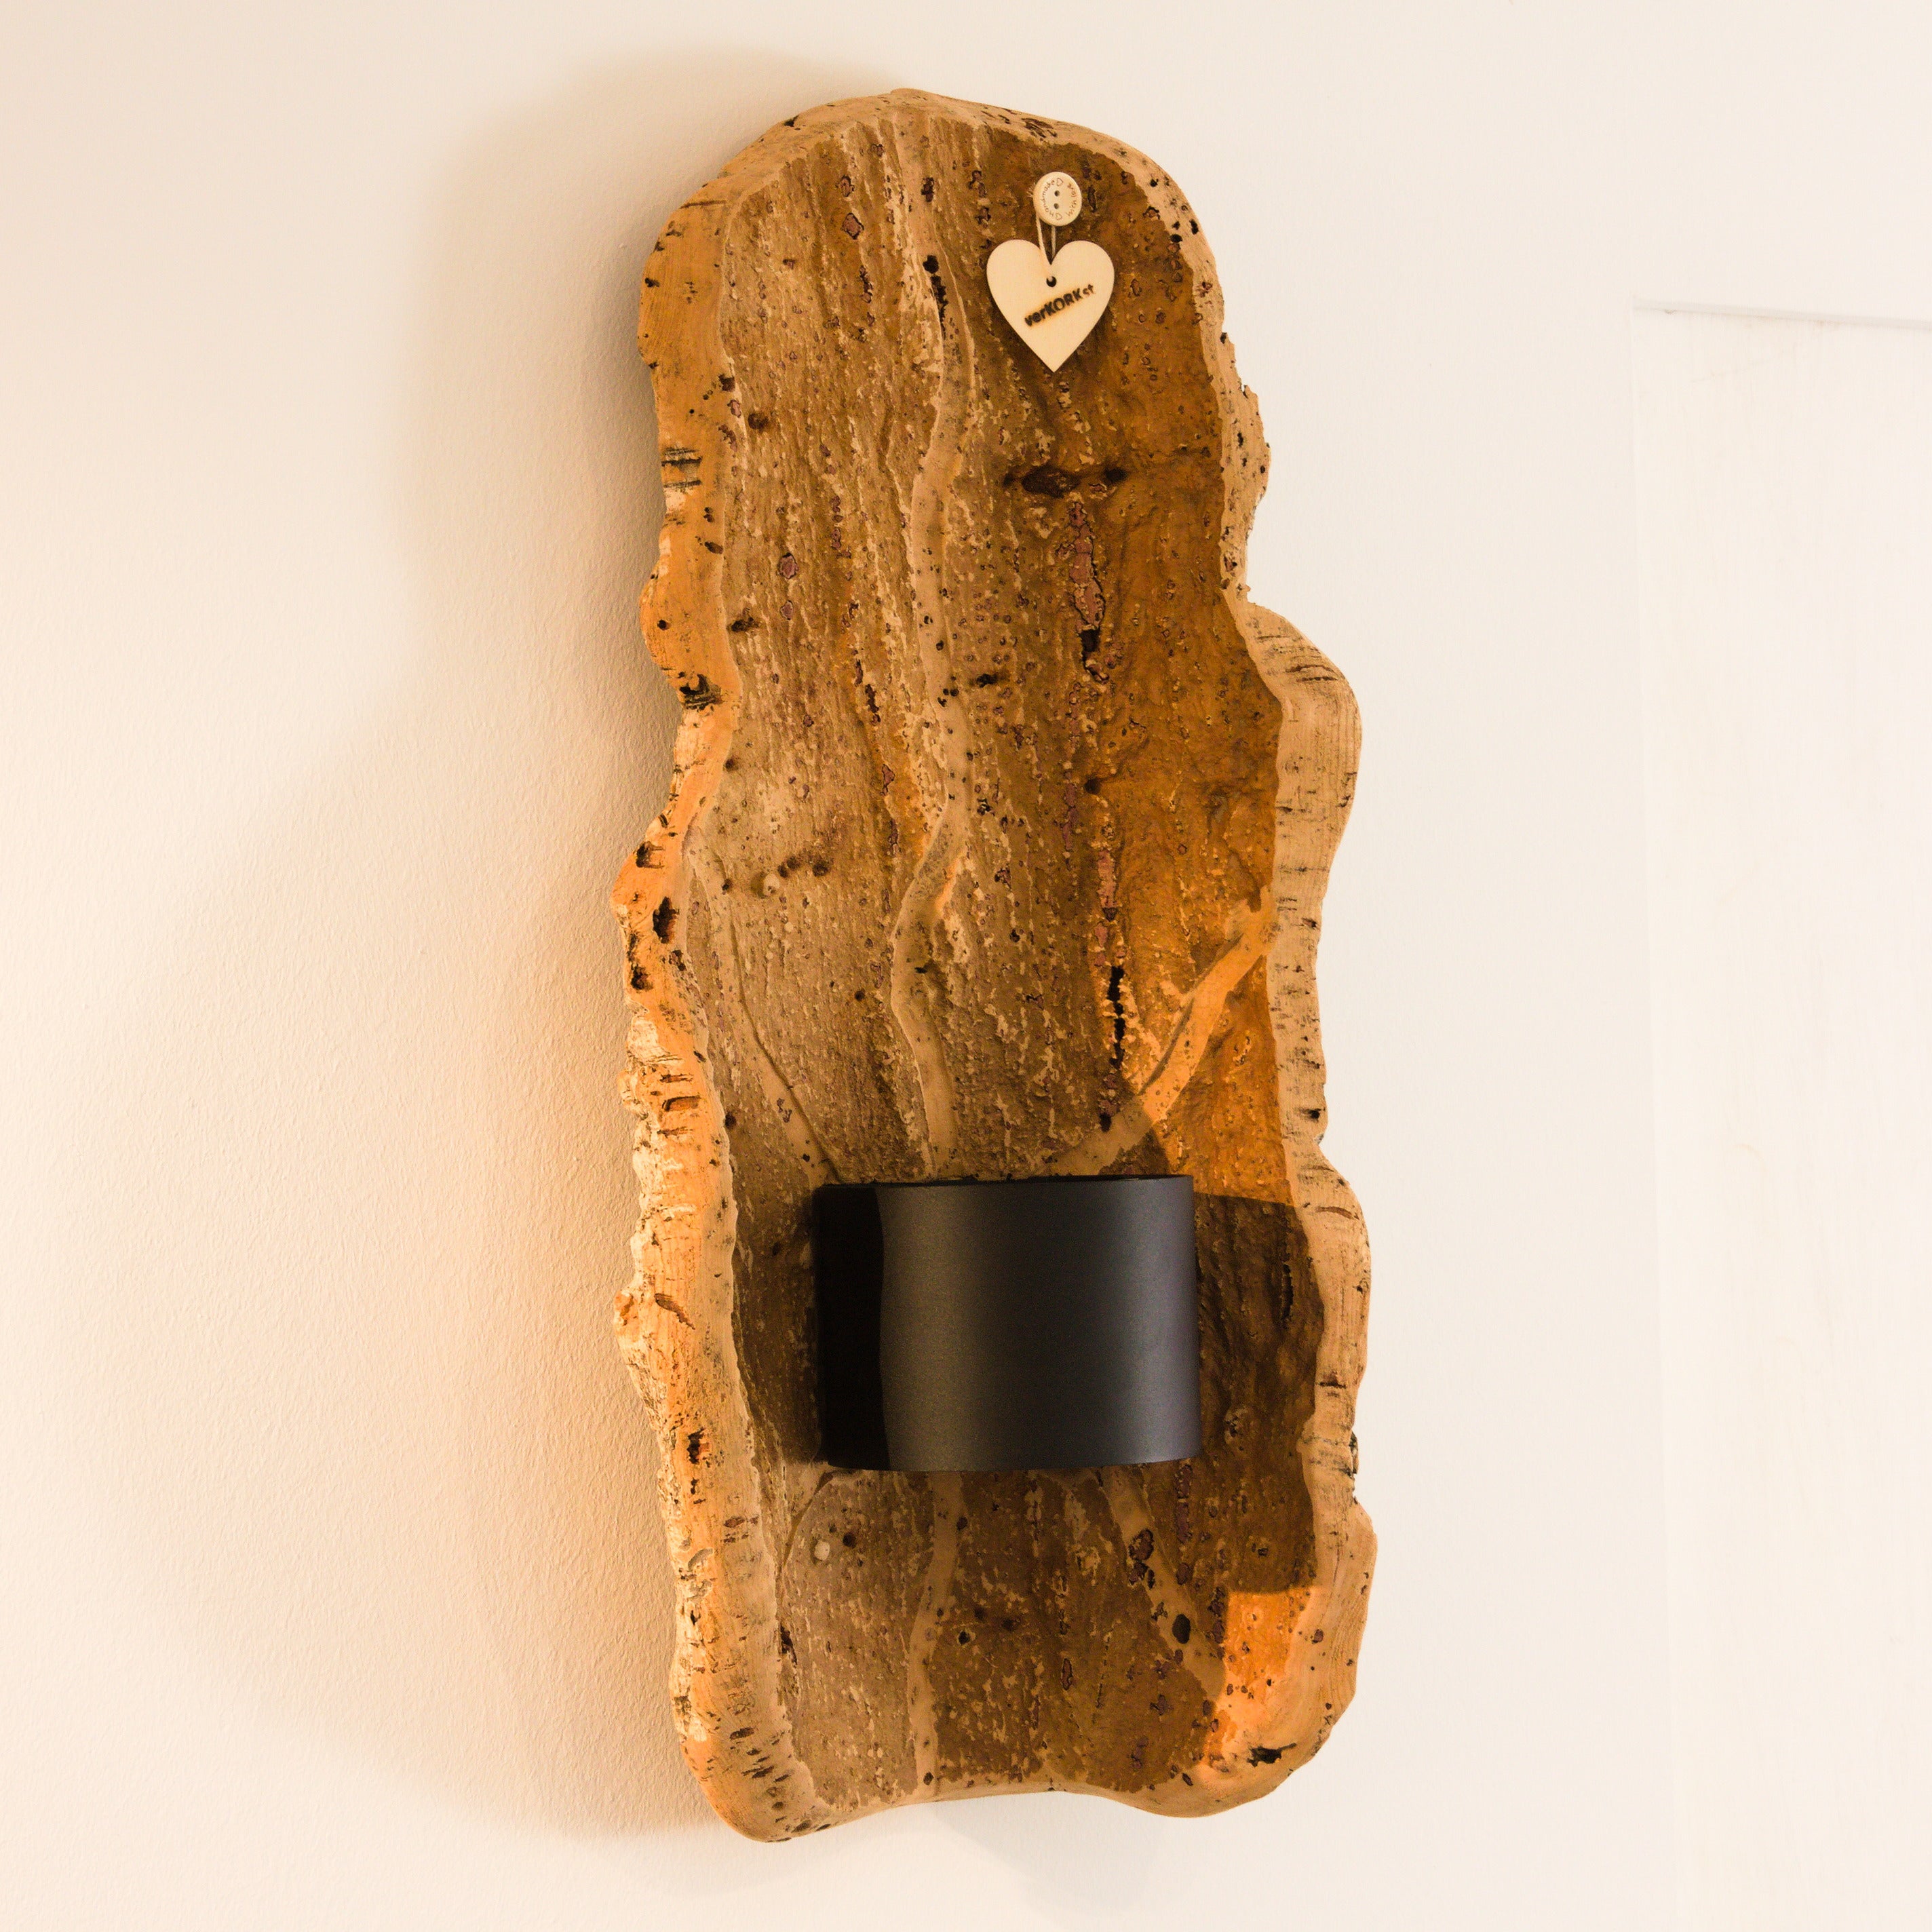 verKORKst premium wireless wall lamp made of cork bark * rechargeable battery * motion sensor * exclusive vintage wall lamp in country style